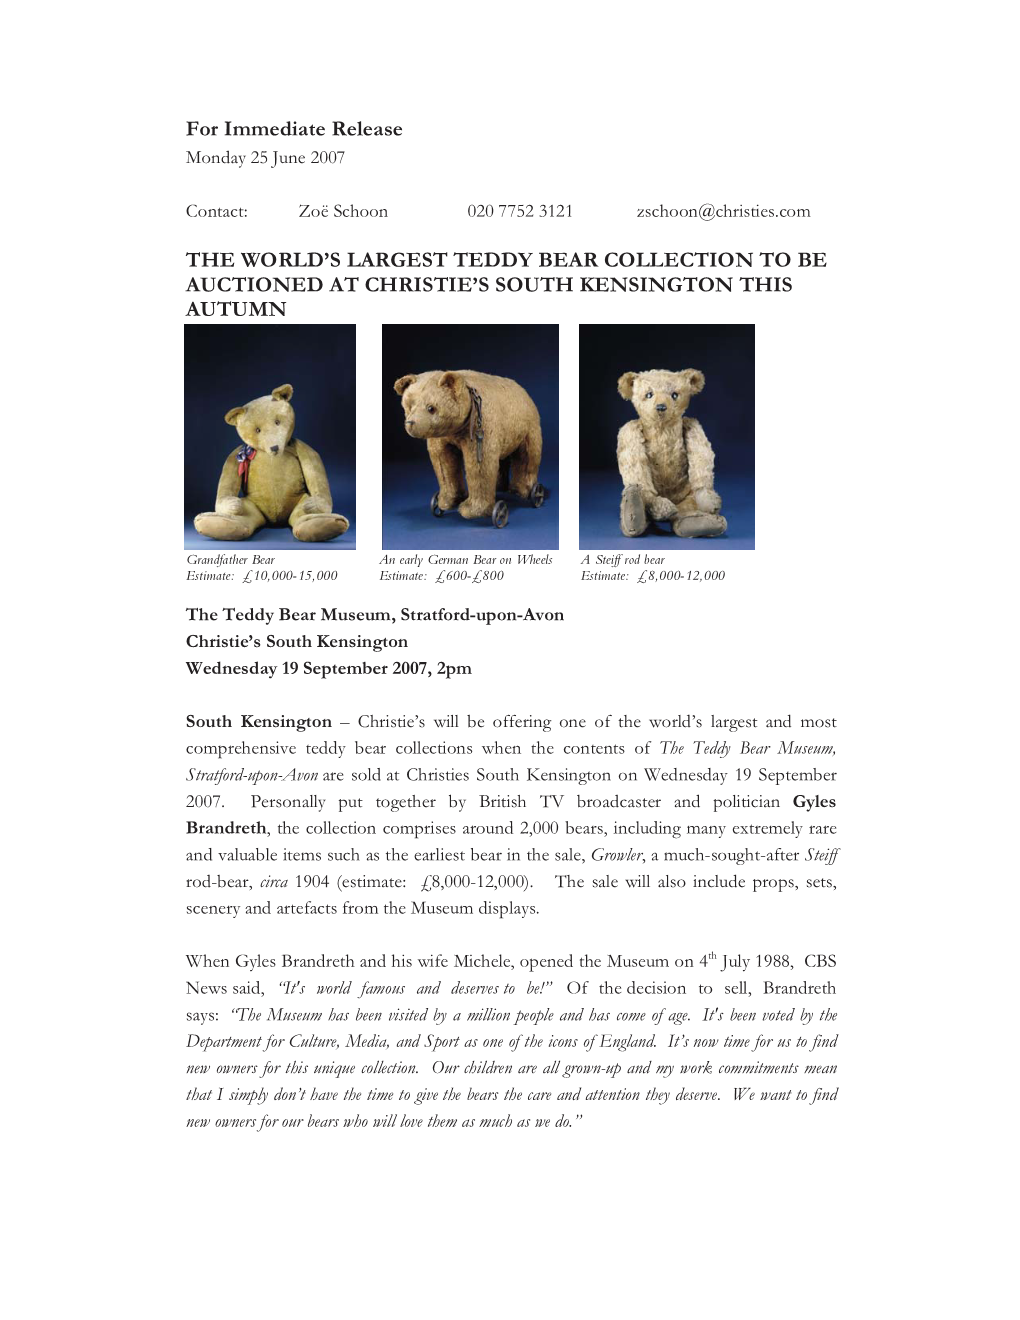 For Immediate Release the WORLD's LARGEST TEDDY BEAR